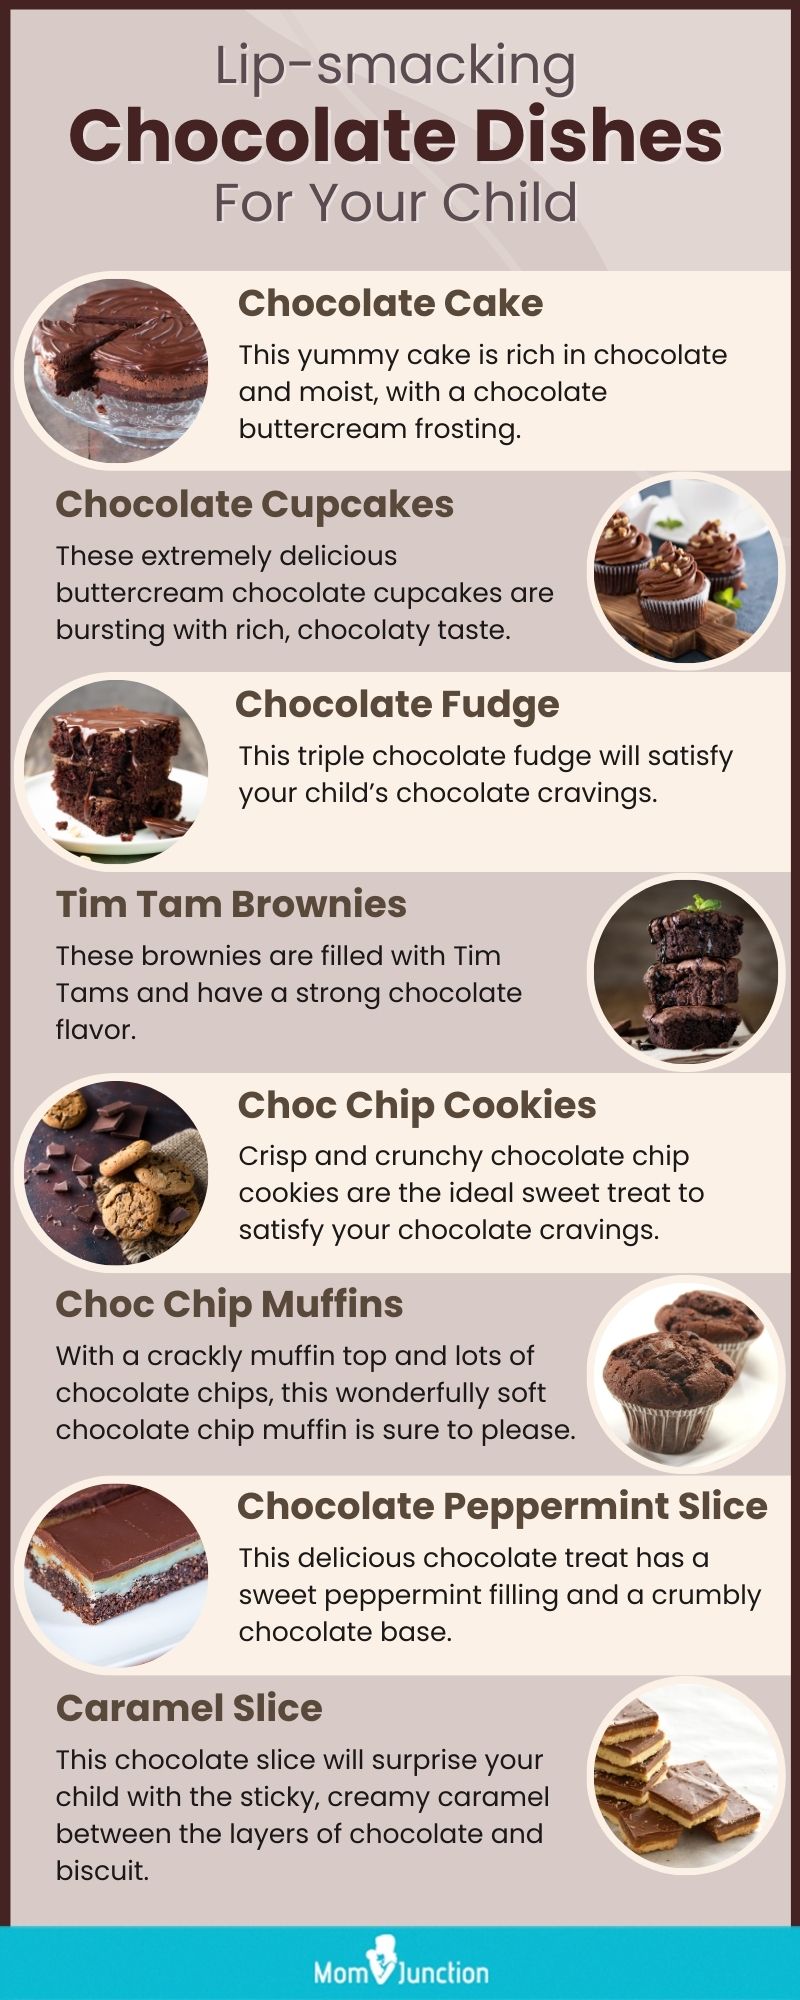 lip smacking chocolate dishes for your child (infographic)